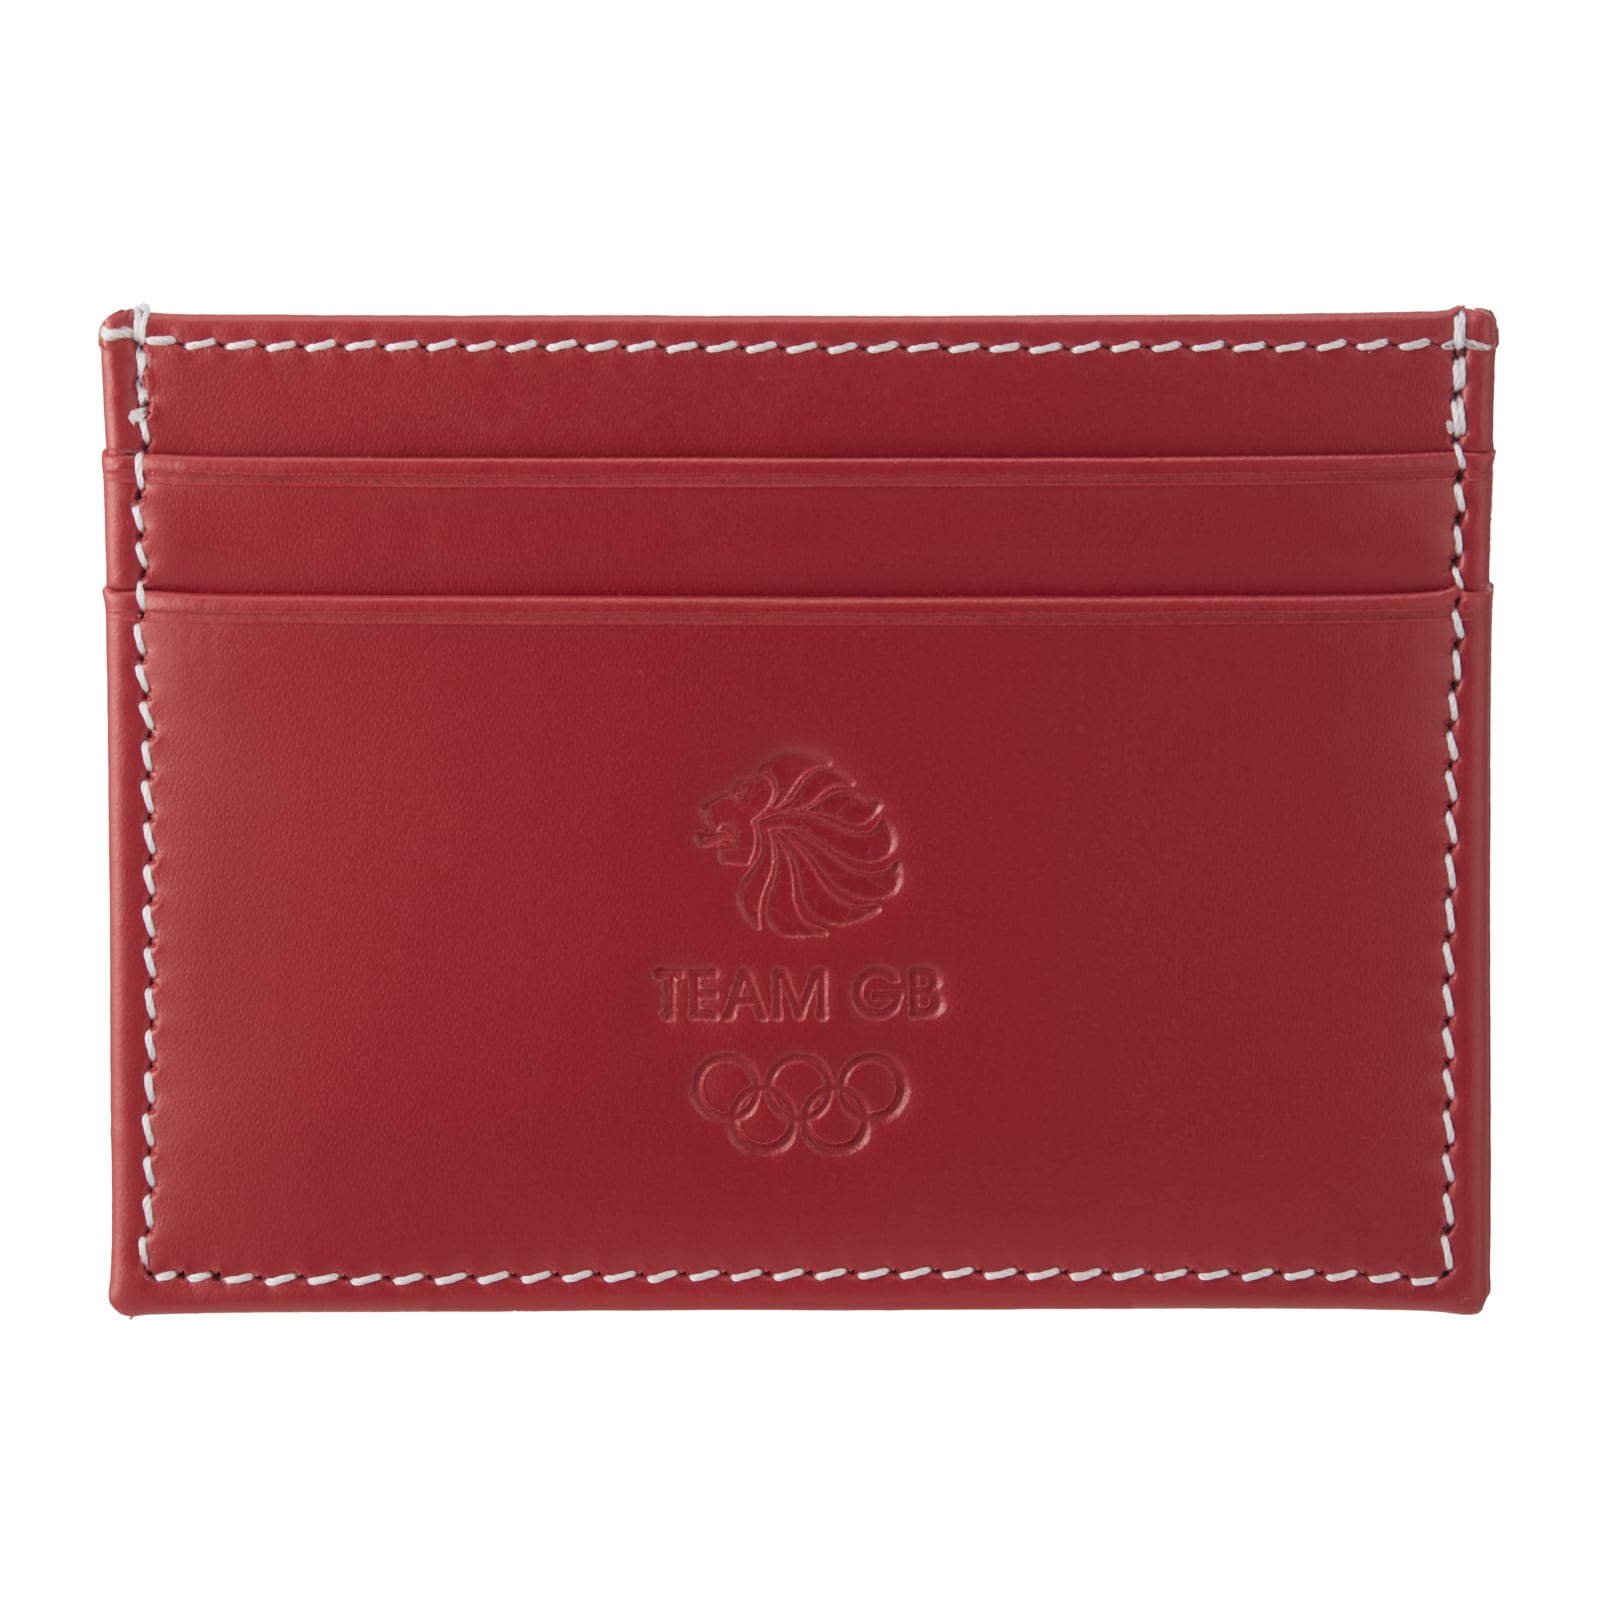 Team GB Smooth Leather 4CC Wallet - Red